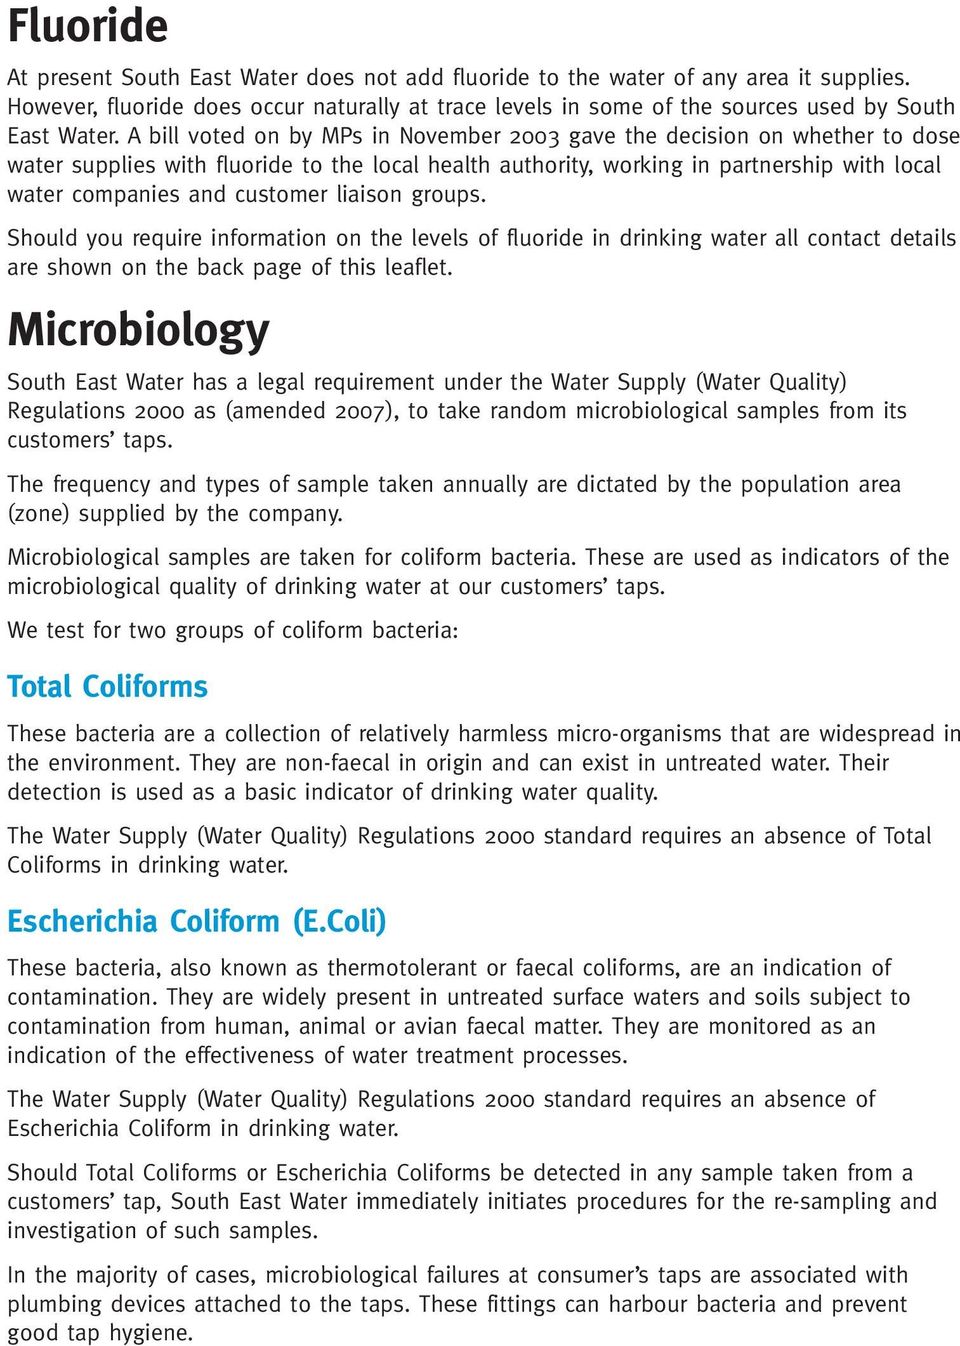 liaison groups. Should you require information on the levels of fluoride in drinking water all contact details are shown on the back page of this leaflet.